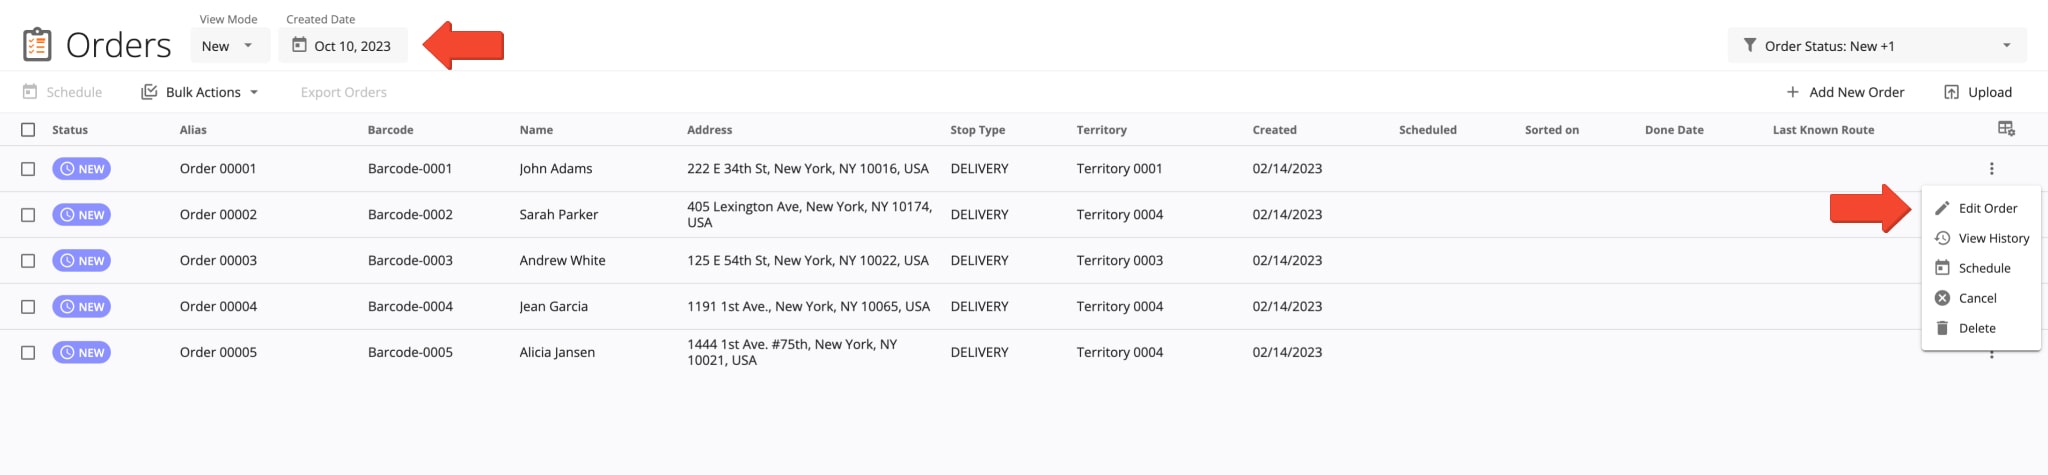 Uploaded orders are assigned the New order statuses, and the Custom Data in orders can be managed by editing orders.